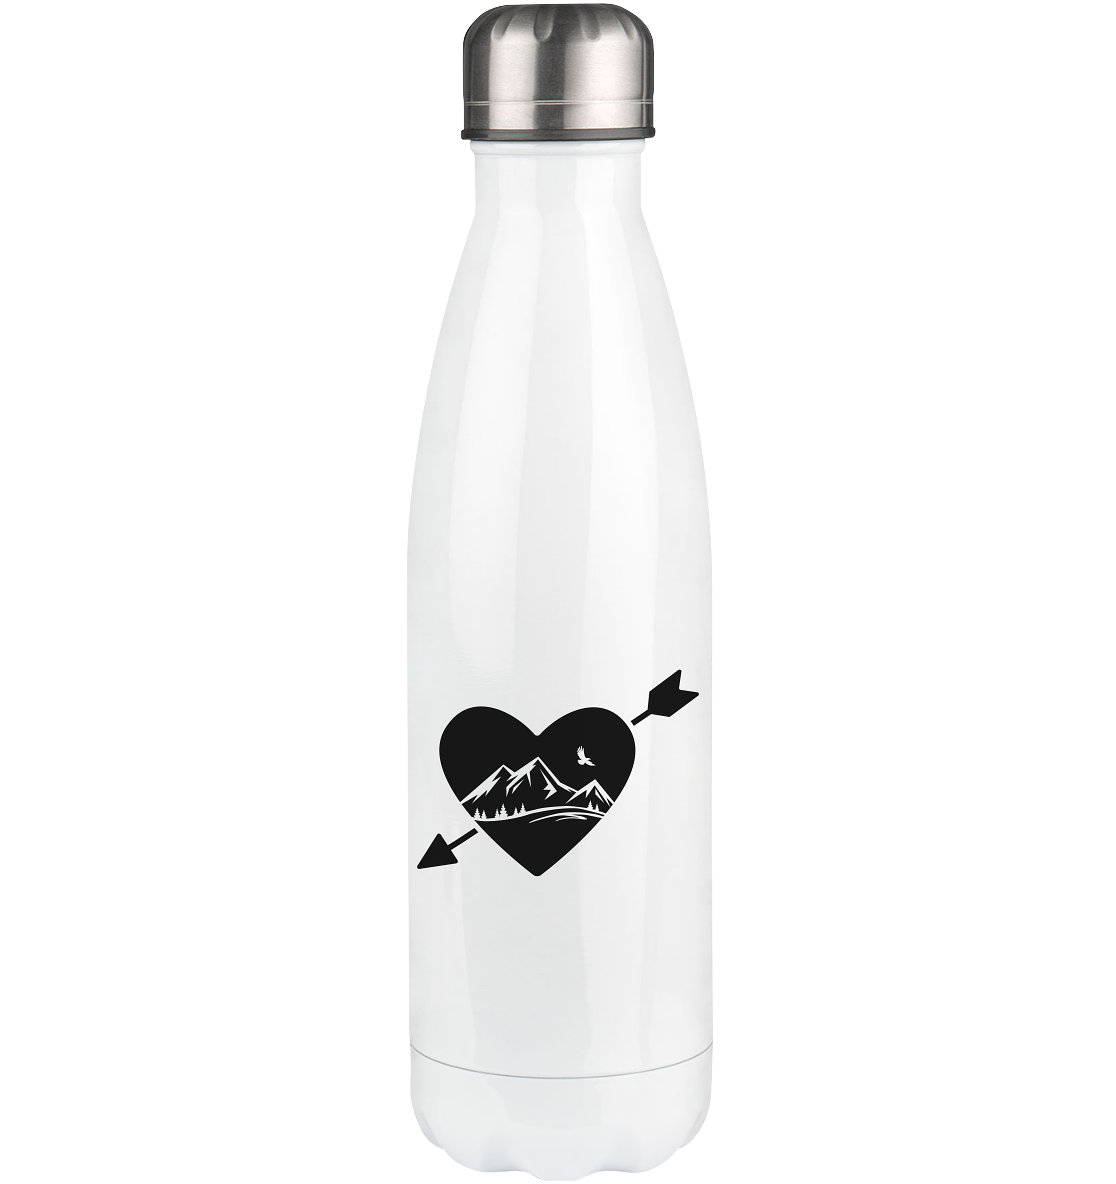 Arrow Heart and Mountain - Edelstahl Thermosflasche berge 500ml